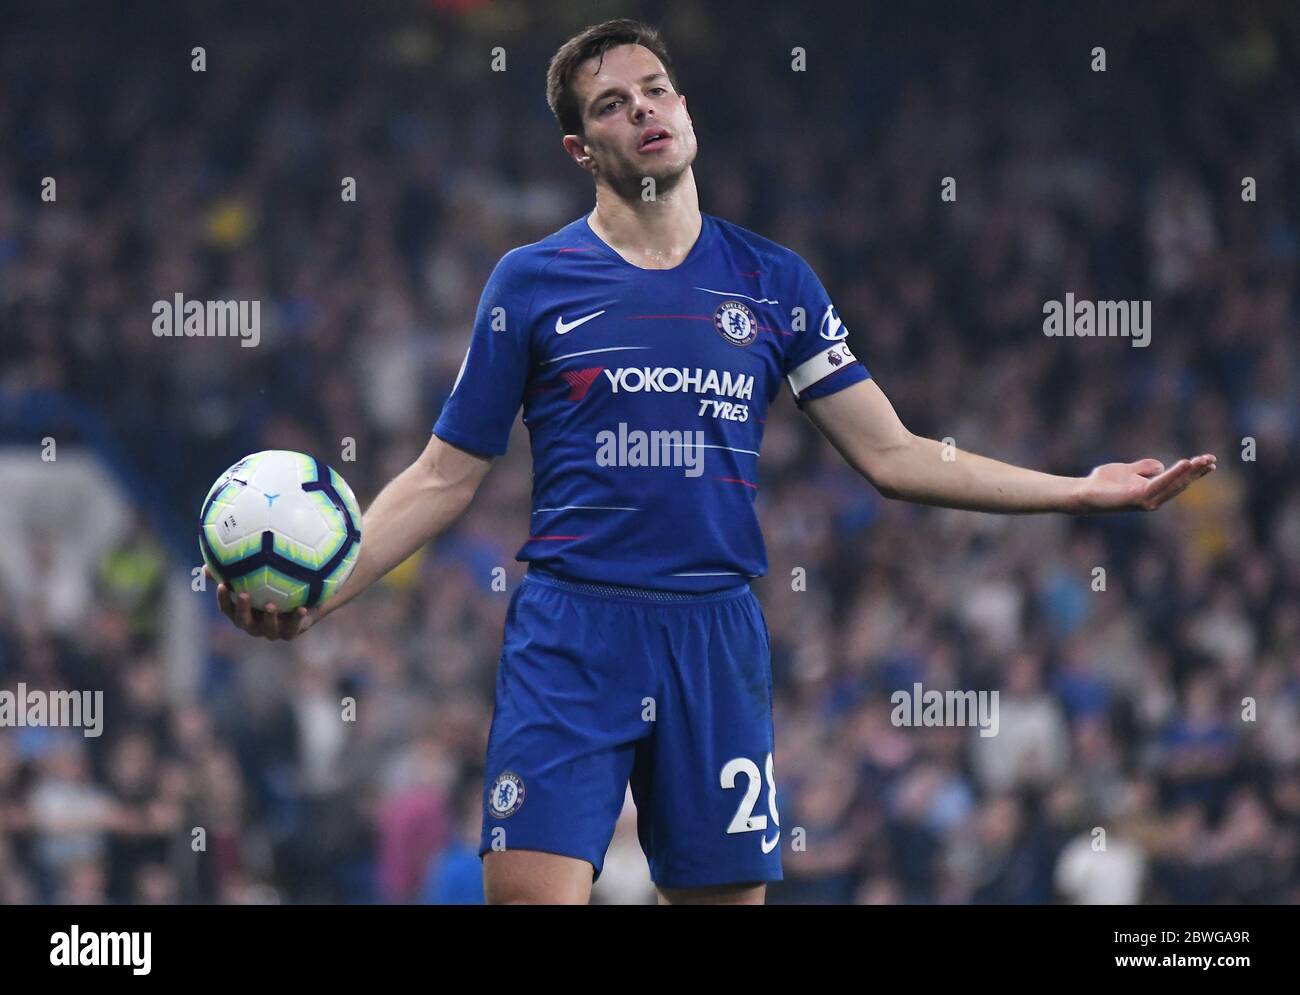 LONDON, ENGLAND - APRIL 22, 2019: Cesar Azpilicueta of Chelsea pictured during the 2018/19 Premier League game between Chelsea FC and Burnley FC at Stamford Bridge. Stock Photo